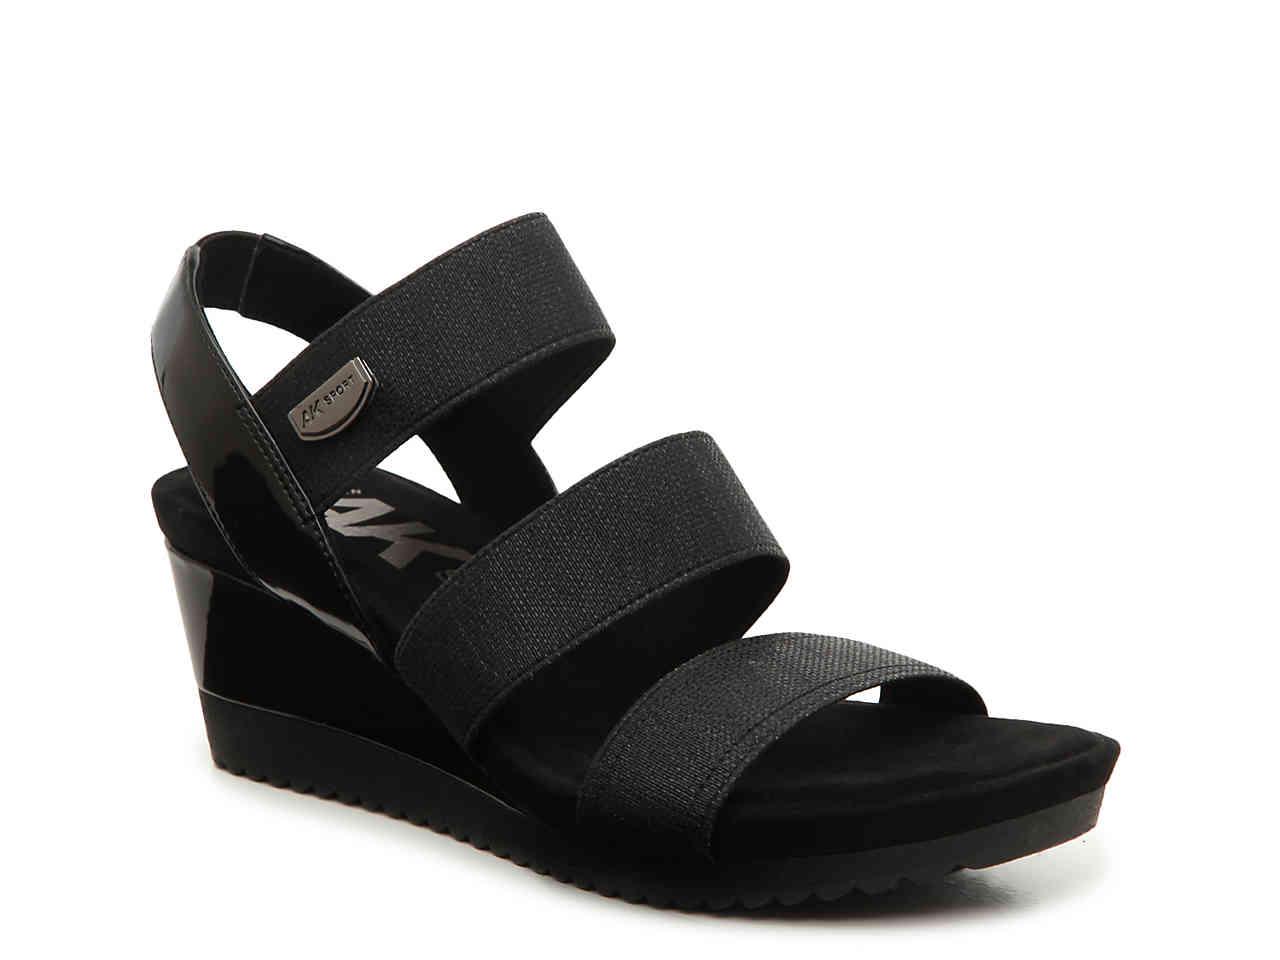 Anne Klein Synthetic Shelly Wedge Sandal in Black - Lyst